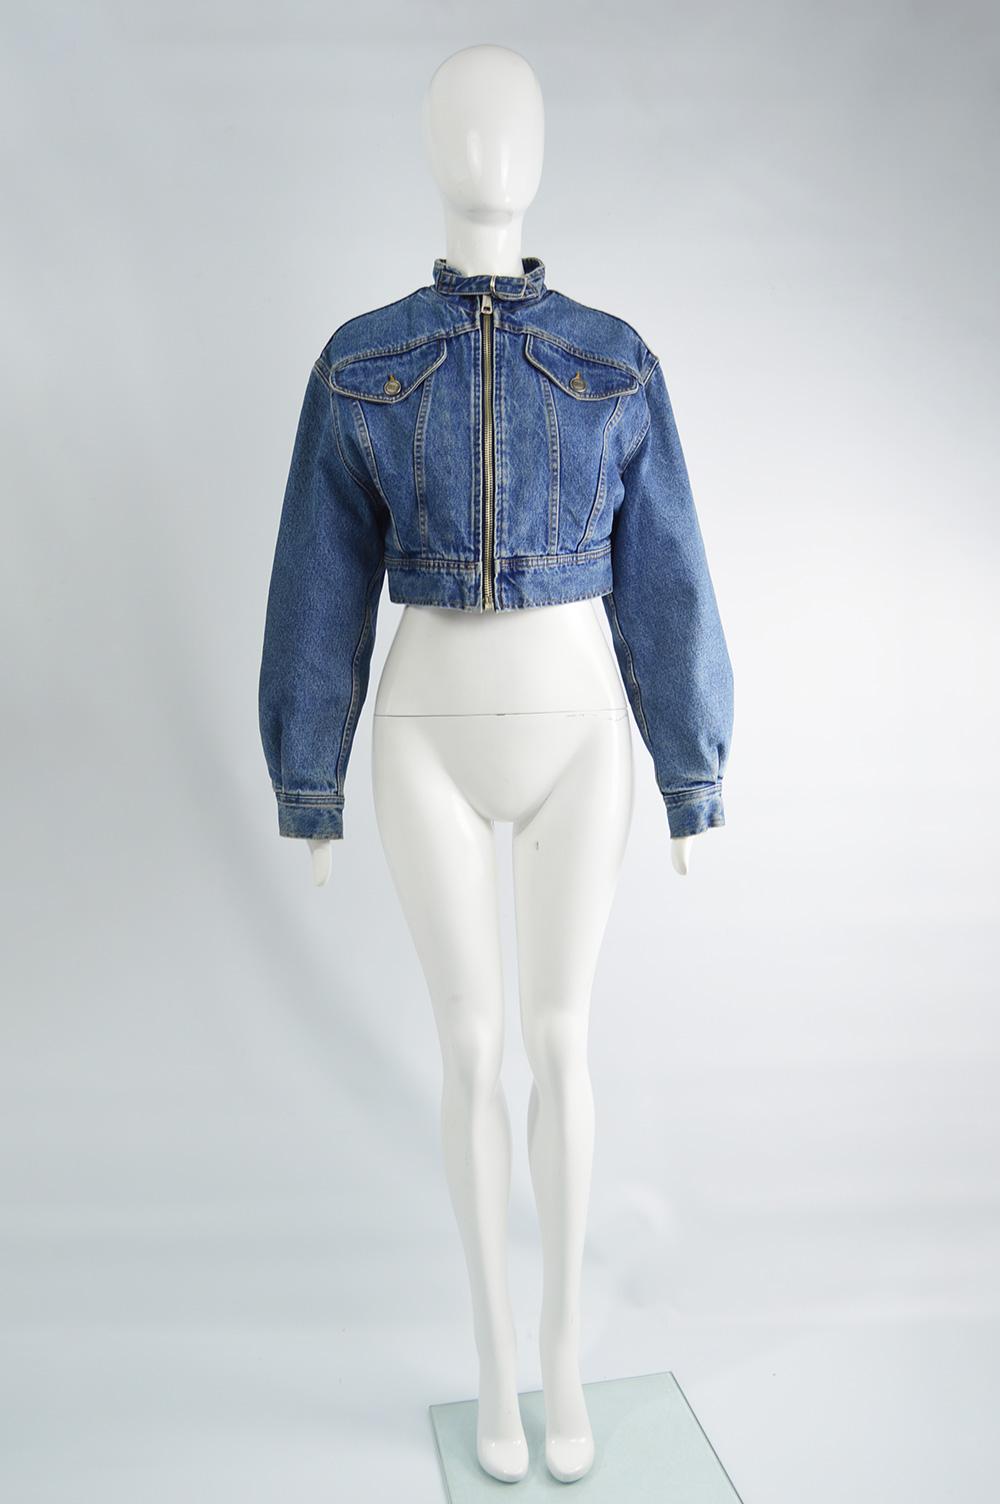 A stylish vintage women's cropped denim jacket from the 90s by Gianfranco Ferre. In a blue denim with a cafe racer style neckline, bold patches on the back and an incredible silver and blue lamé lining. 

Size: Marked EU 40 which is roughly a UK 12/